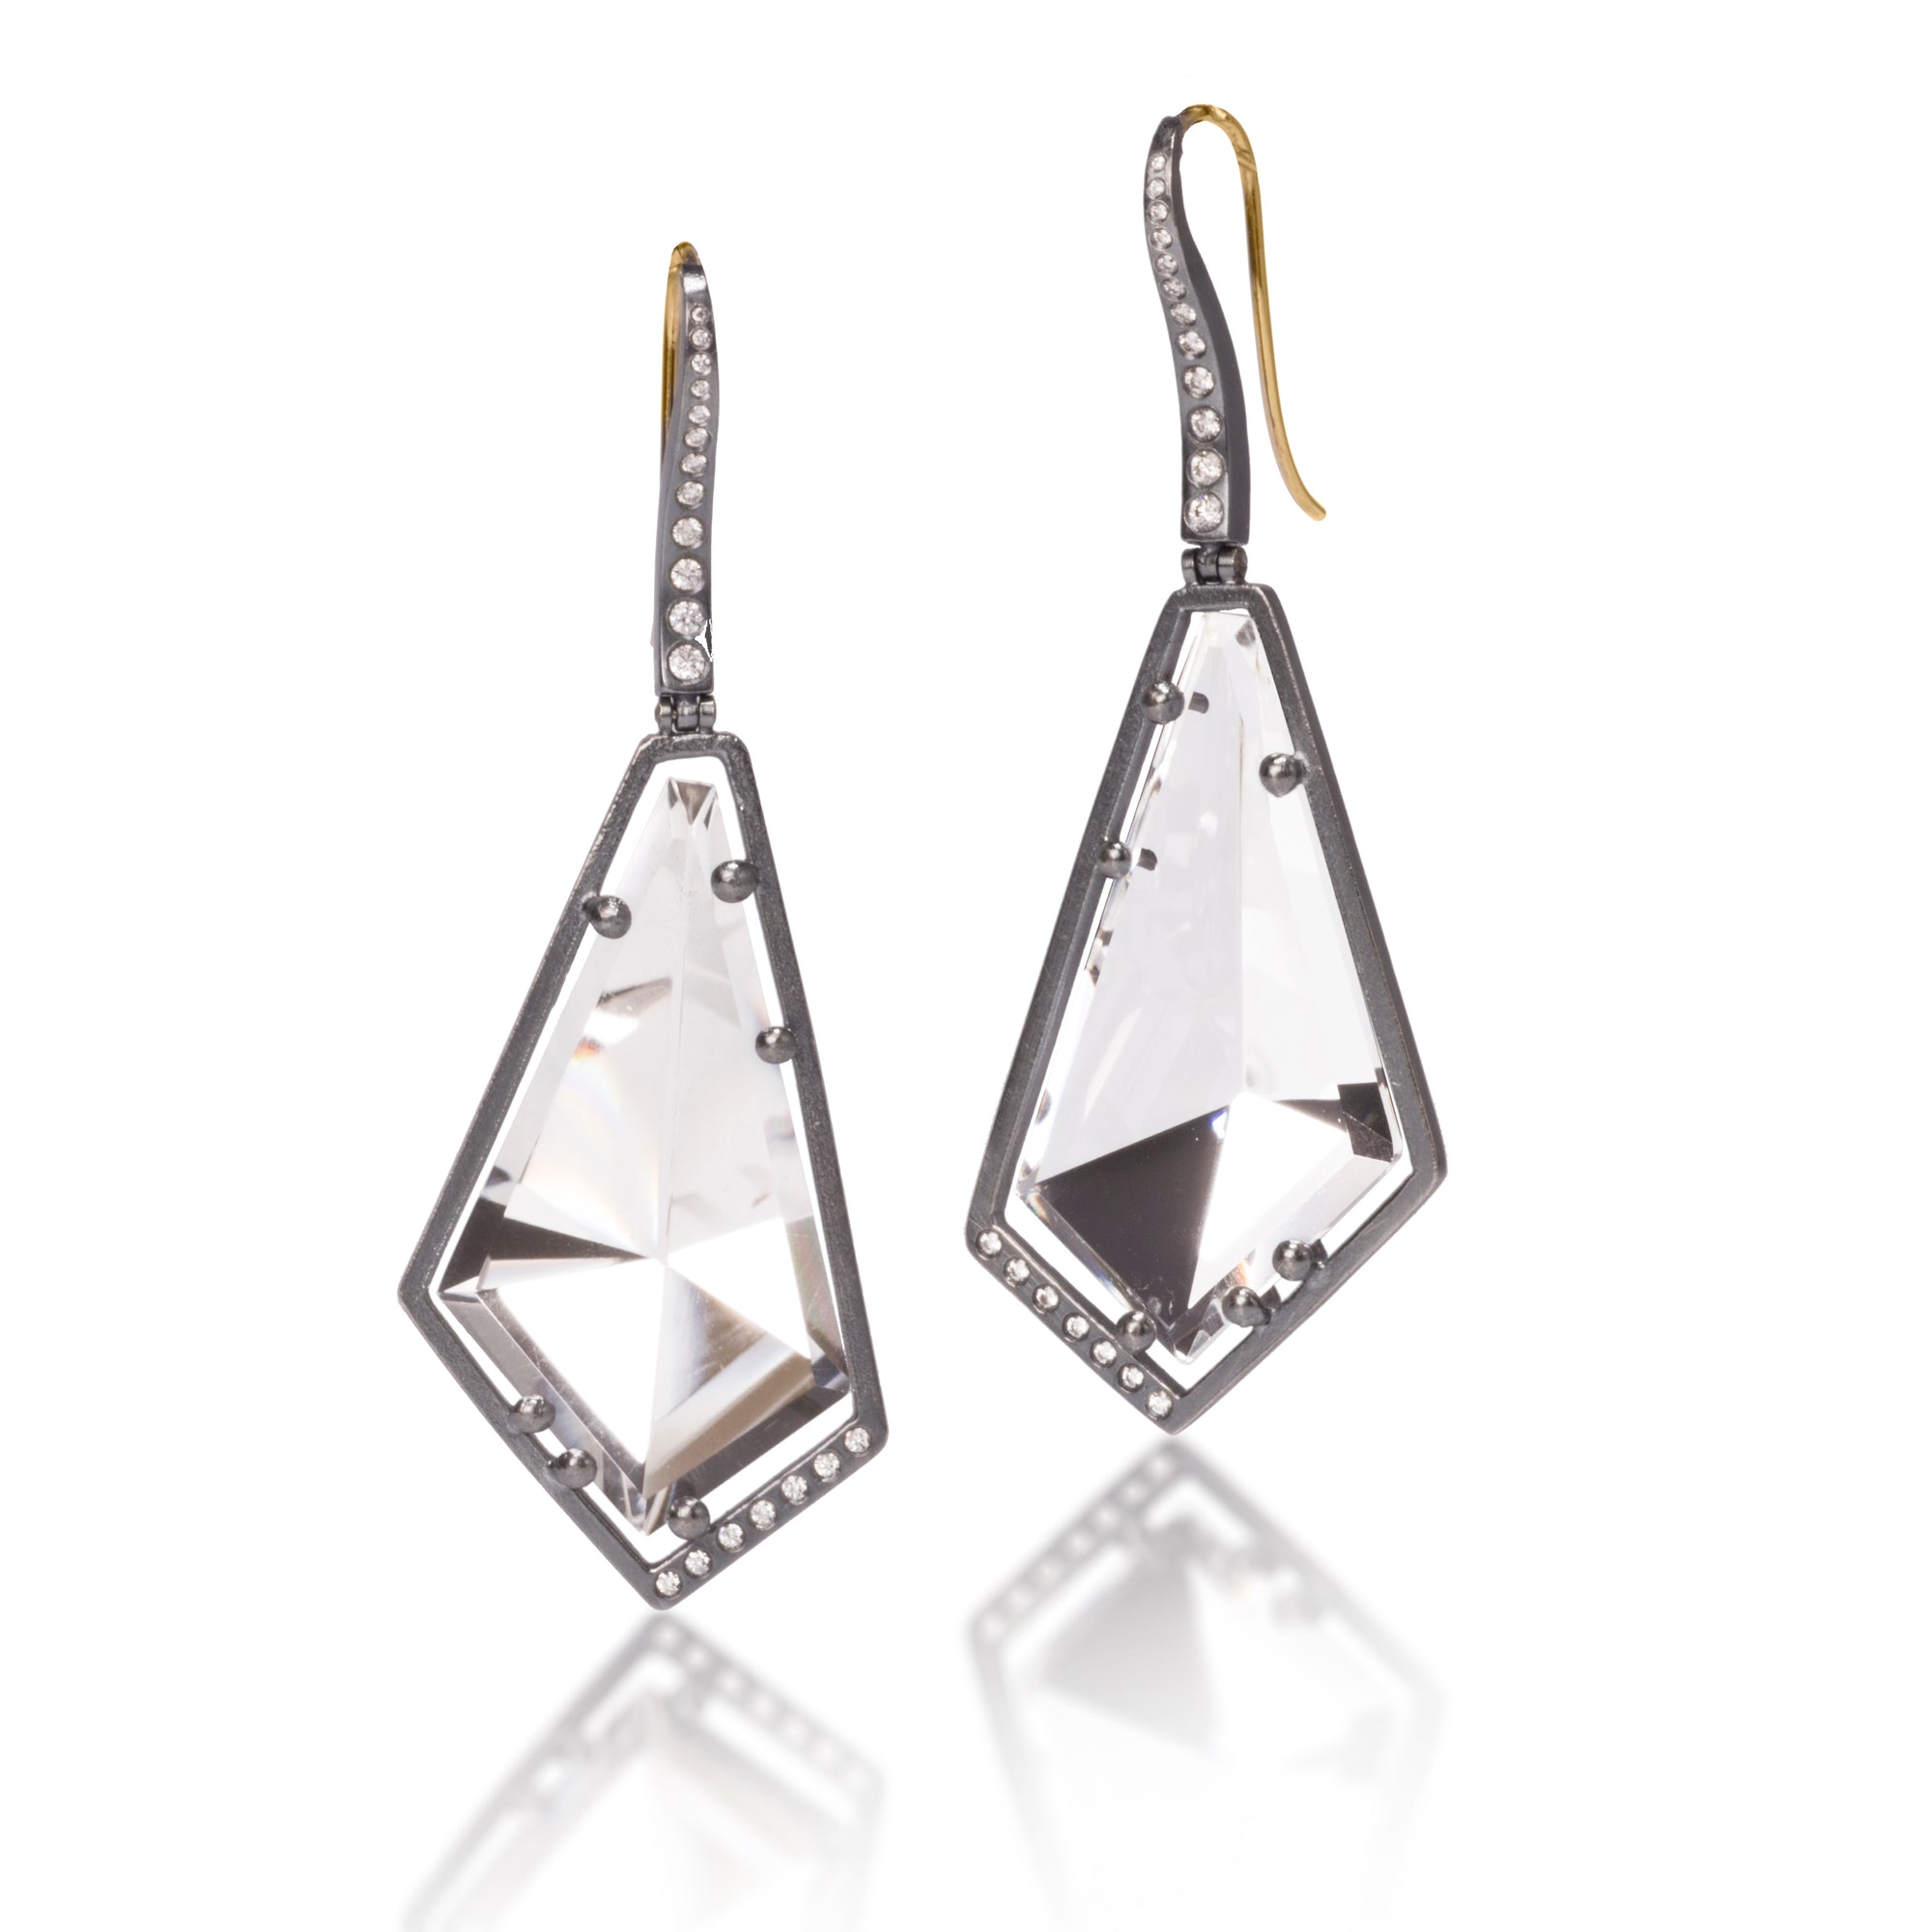 Facets Earring #10 in oxidized sterling silver with “floating” semiprecious, mirror cut gems, 43.75 tcw.  Accented with flush set, ideal cut, white diamonds 0.2566 tcw. This dazzling earring hangs from an 18k gold ear wire.